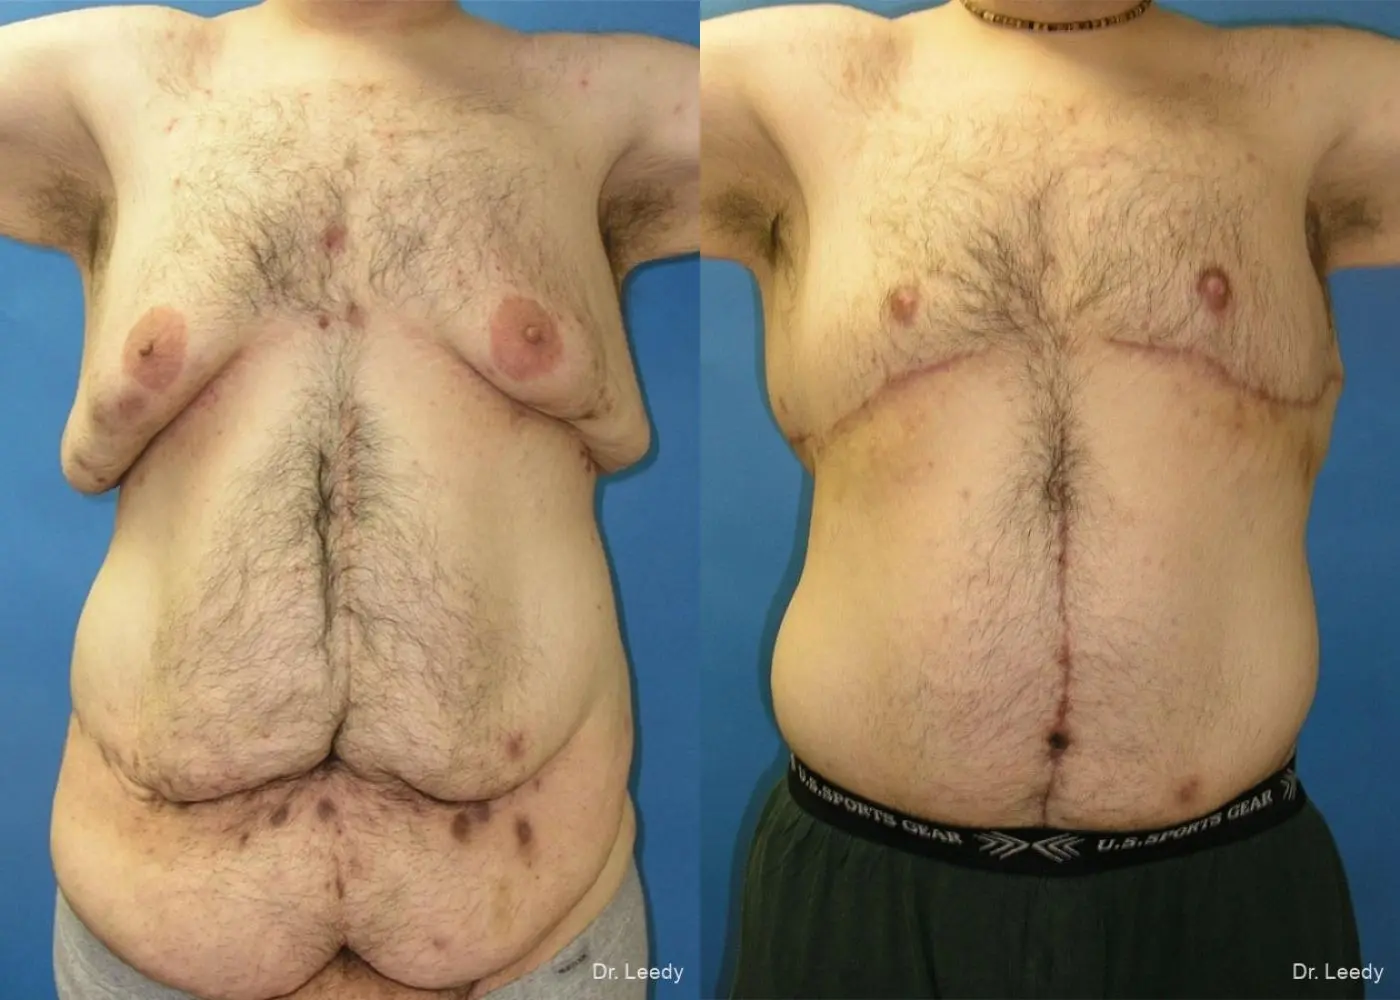 Surgery After Weight Loss: Patient 5 - Before and After 1